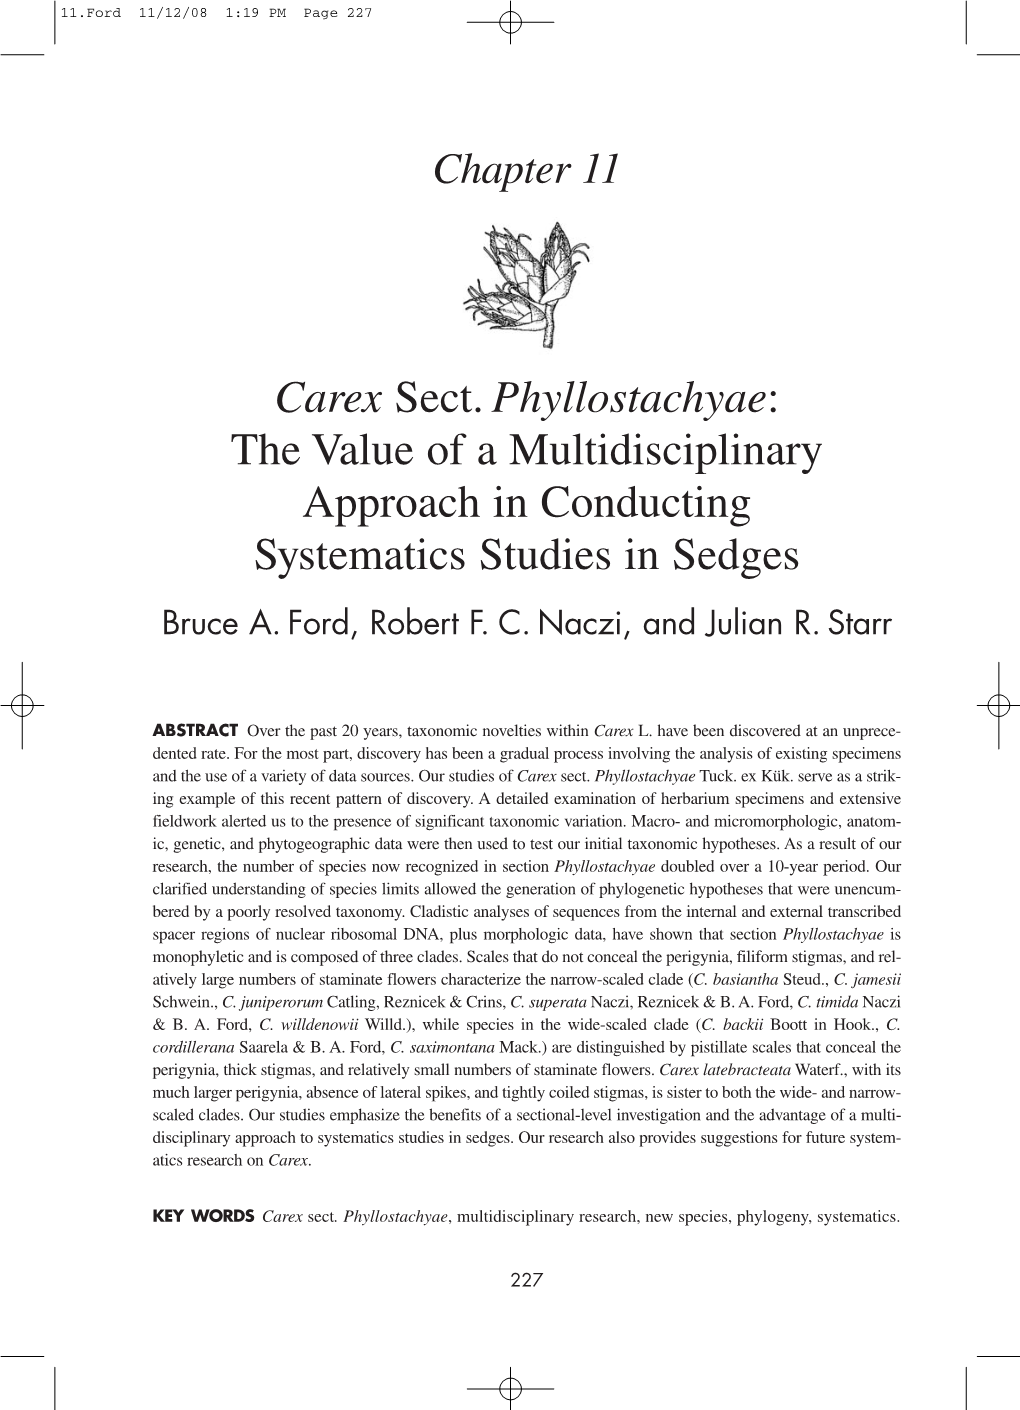 Carex Sect.Phyllostachyae: the Value of a Multidisciplinary Approach in Conducting Systematics Studies in Sedges